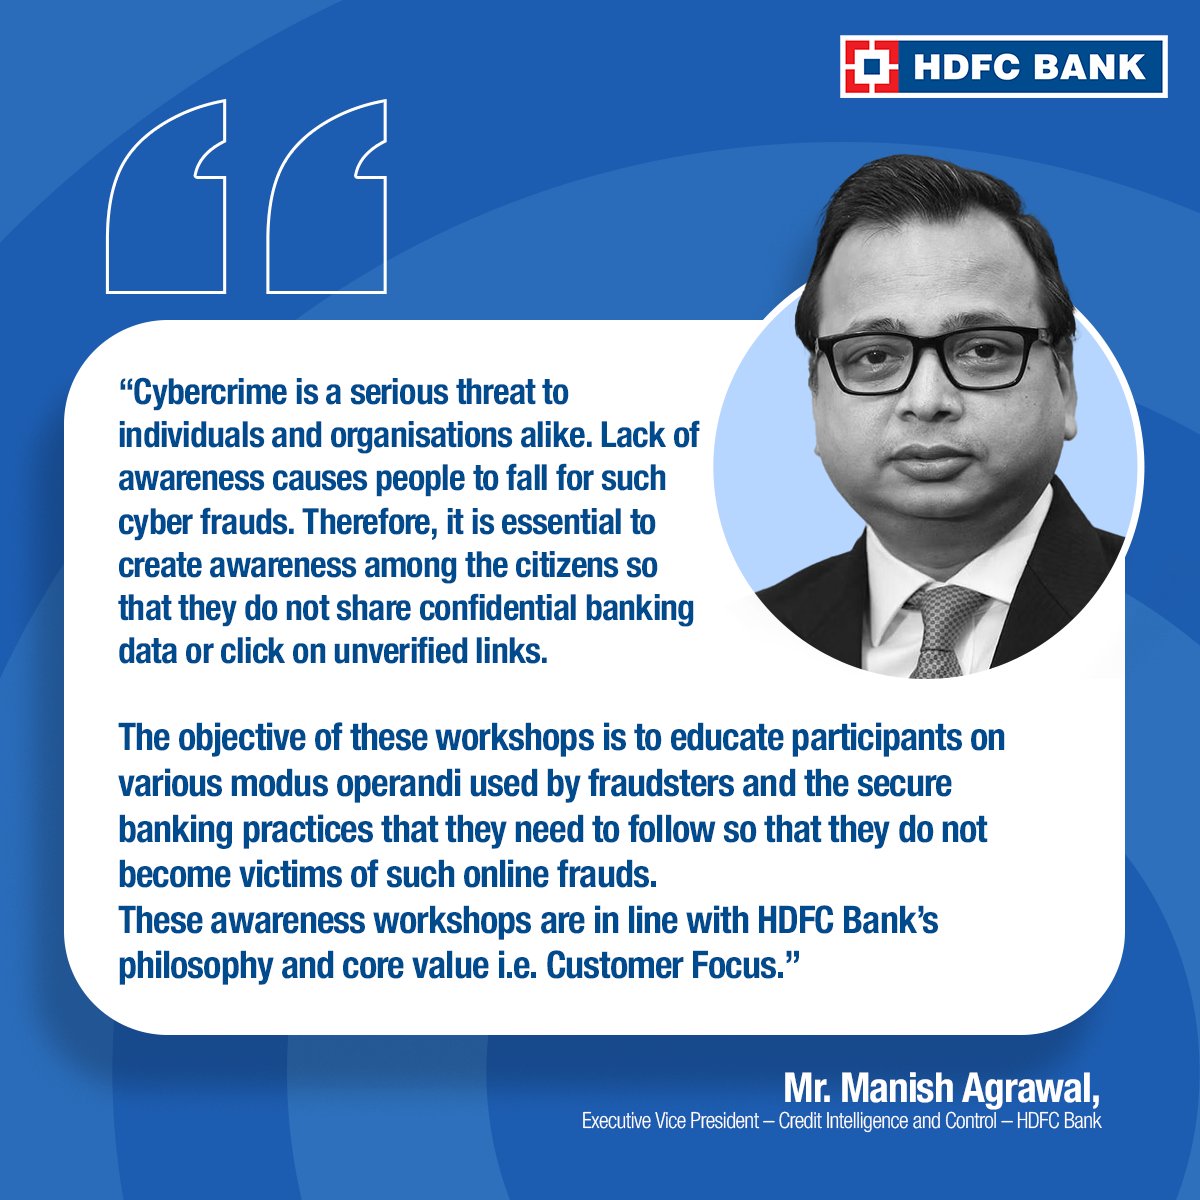 HDFC Bank empowering communities through cyber security workshops. Here's to staying safe and savvy online! Read more below: #HDFCBank #News #DigitalSecurity #CyberSafety